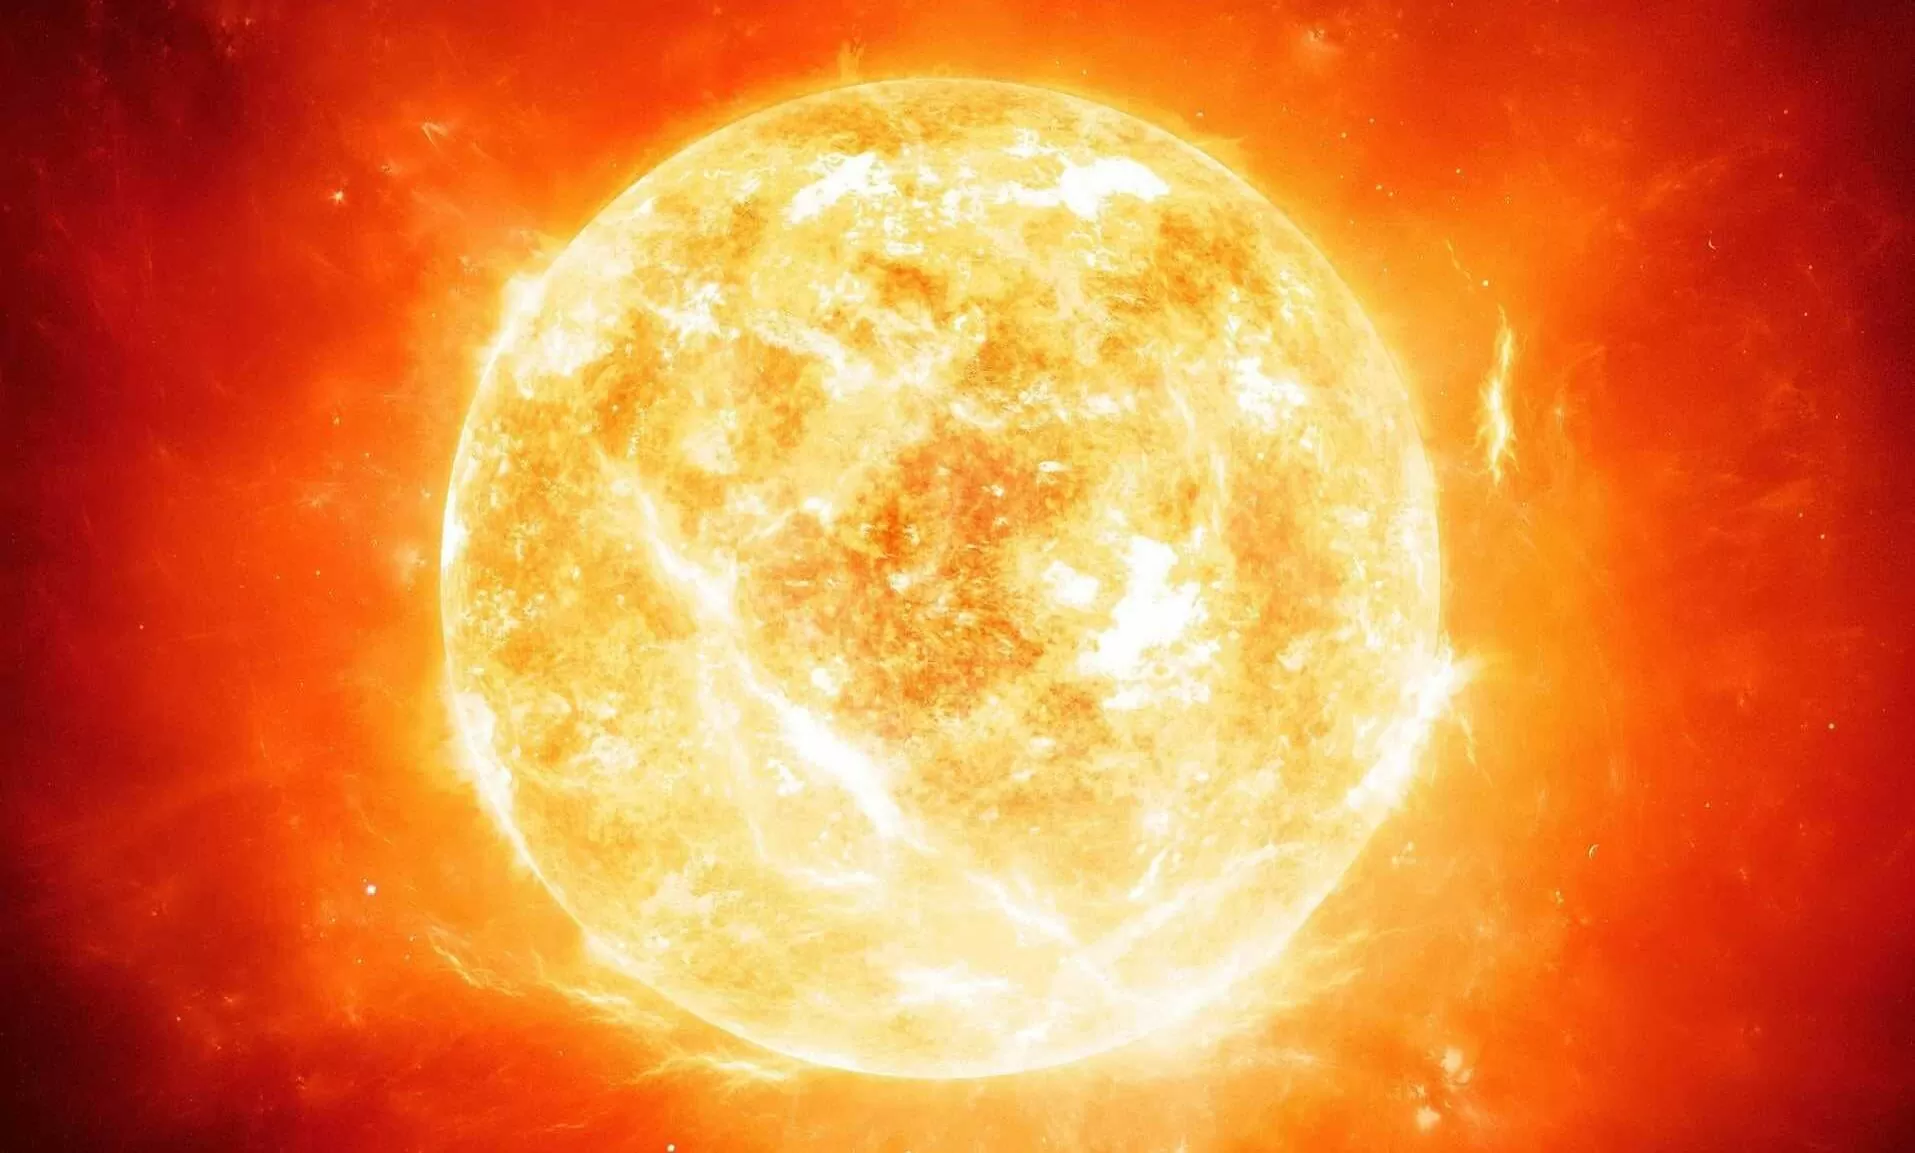 A NASA astronaut confirmed that the Sun is not yellow